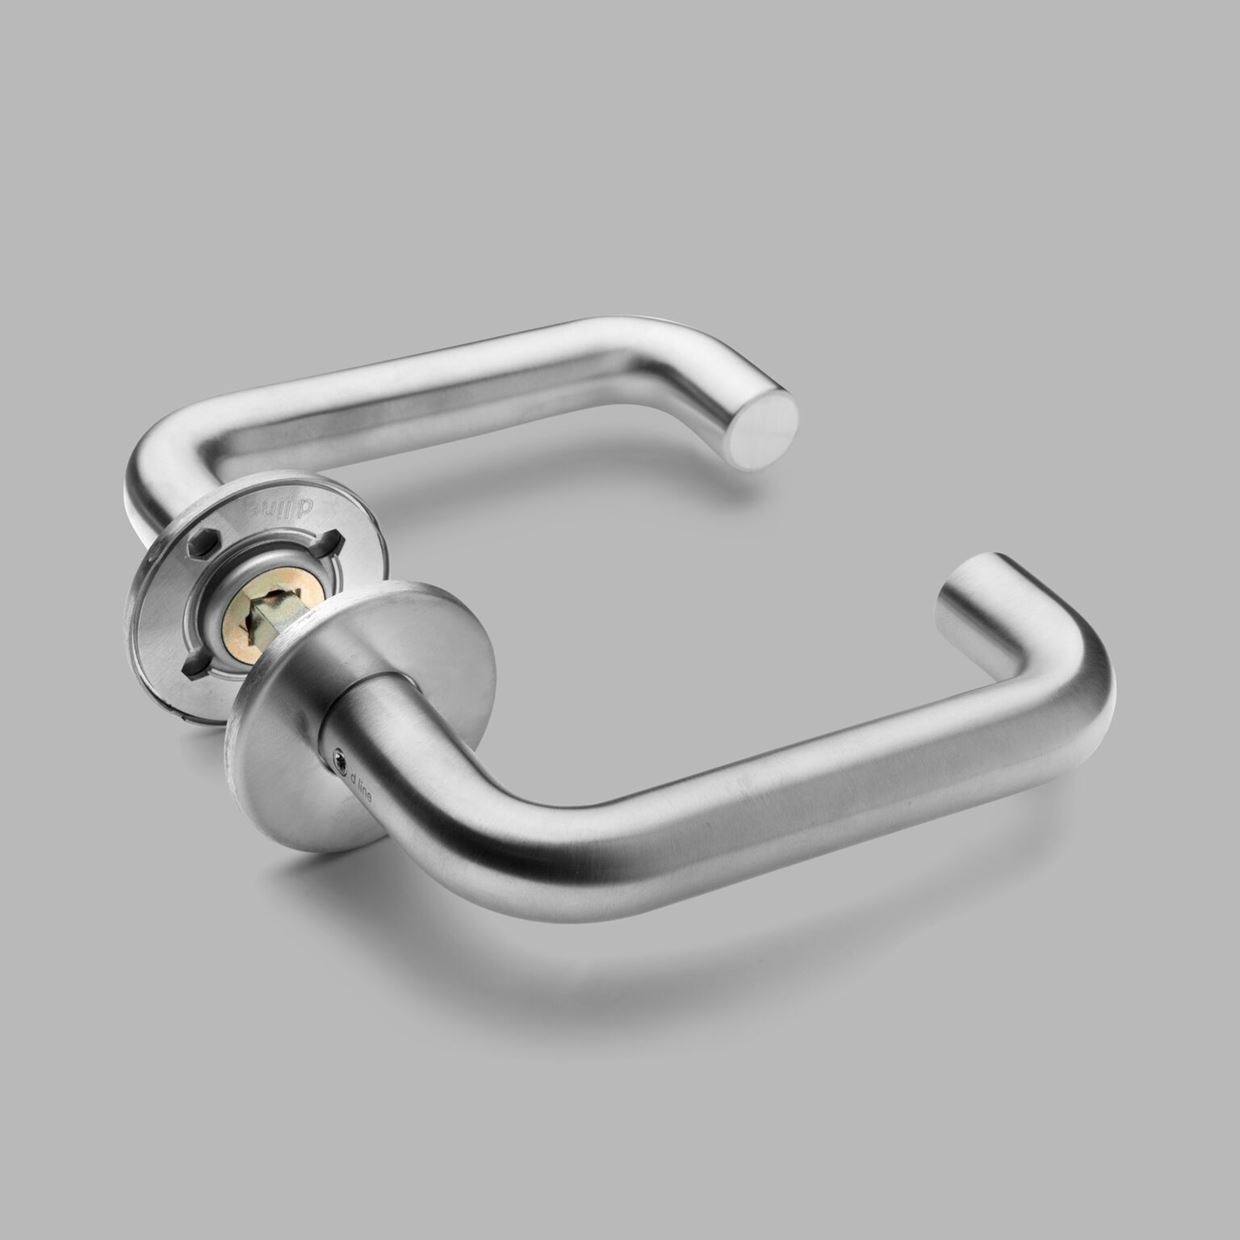 Lever handle U | Knud Holscher collection | d line